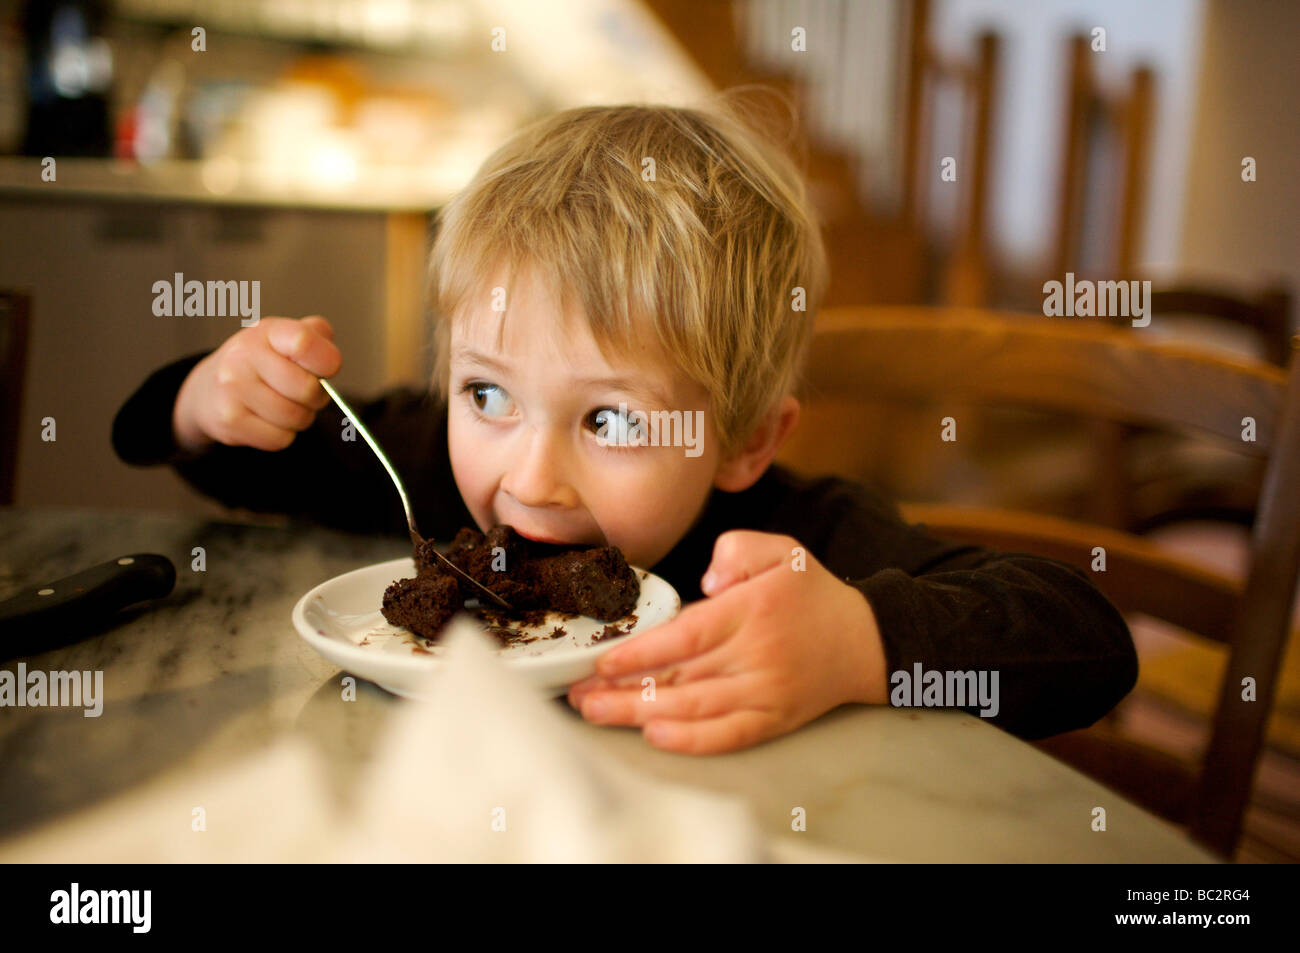 Young boy eating chocolate cake in a restaurant Stock Photo